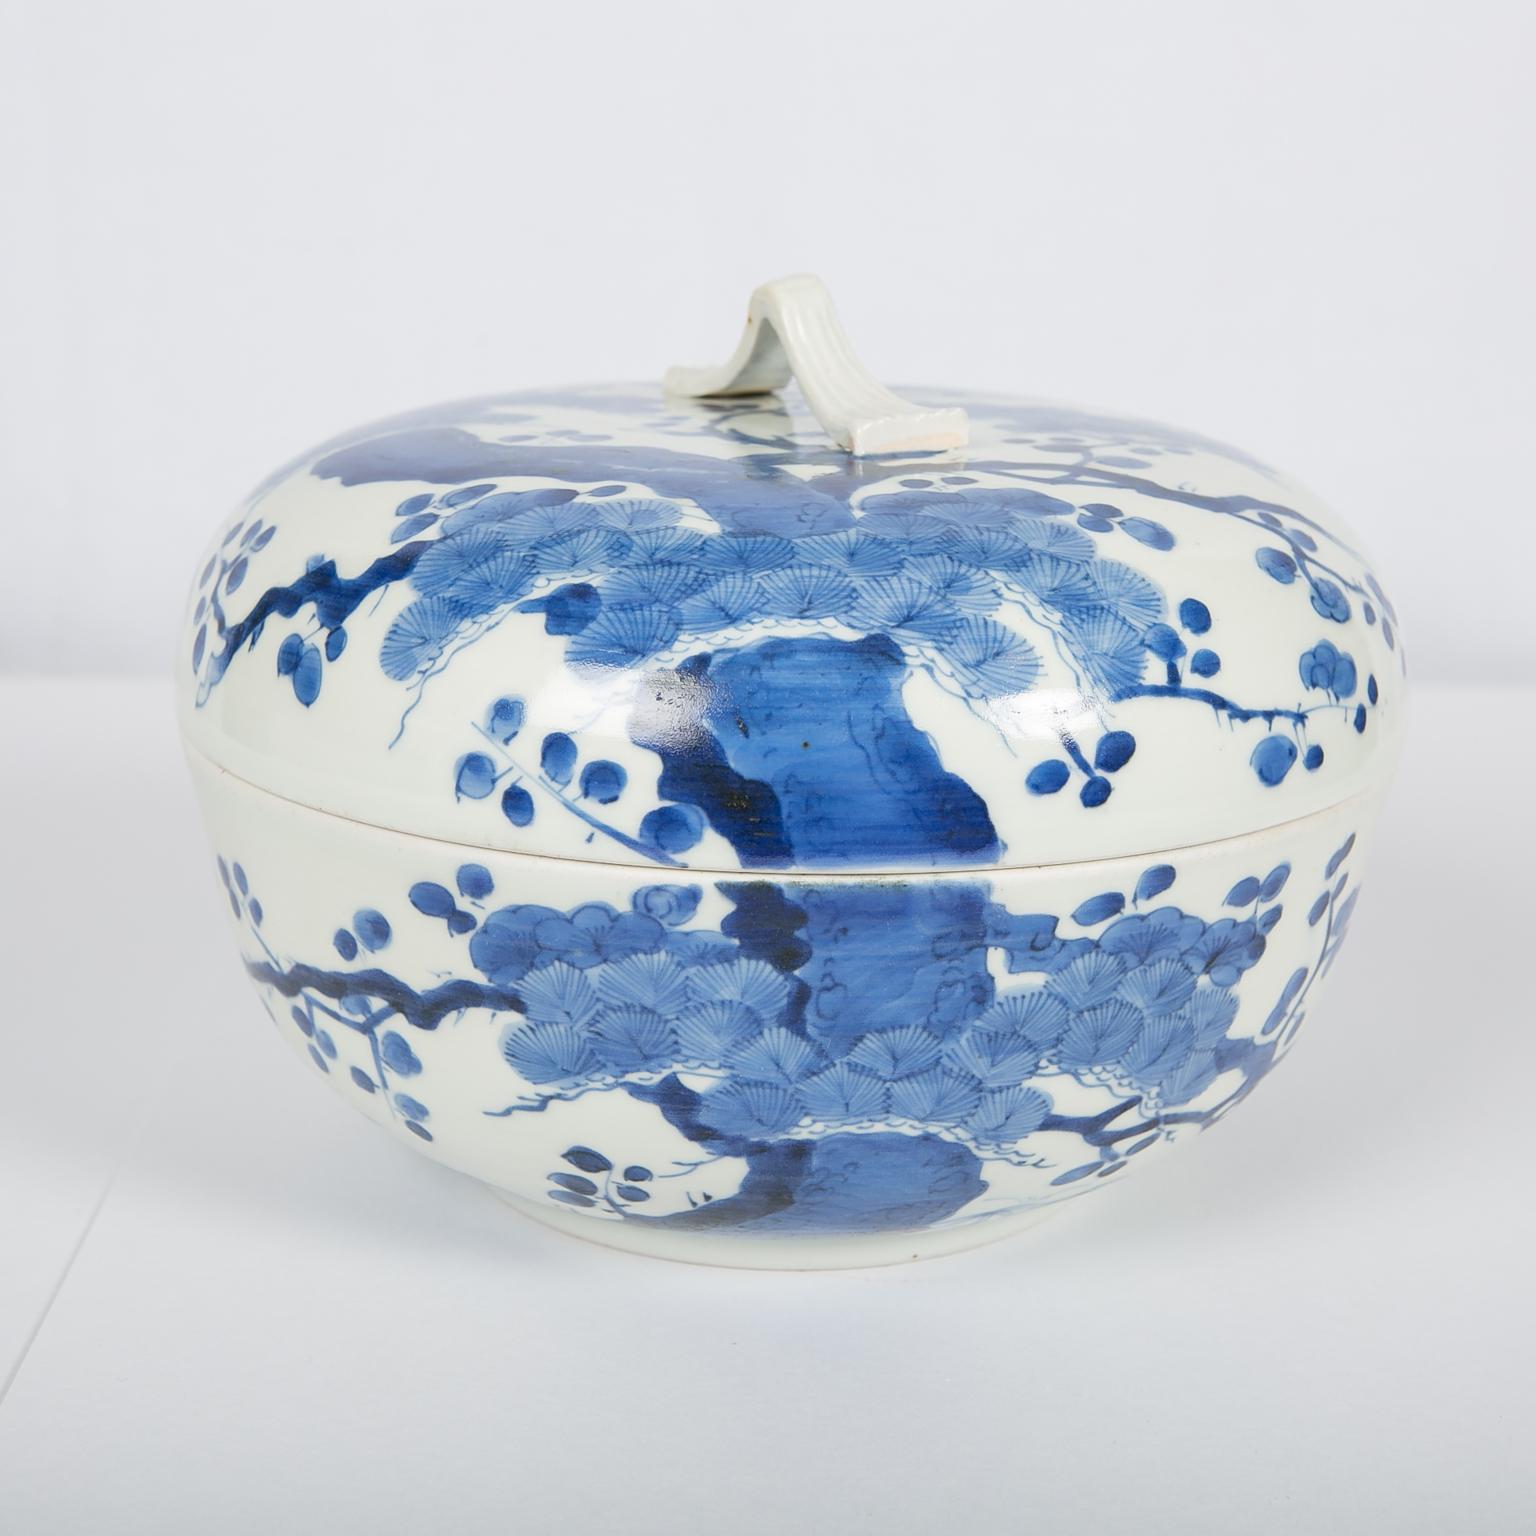 WHY WE LOVE IT: The creamy white and the vivid blue
We are pleased to offer this beautiful Japanese blue and white porcelain covered bowl dated to the early Edo period (circa 1760). The body of this bowl has a smooth texture with soft luster,